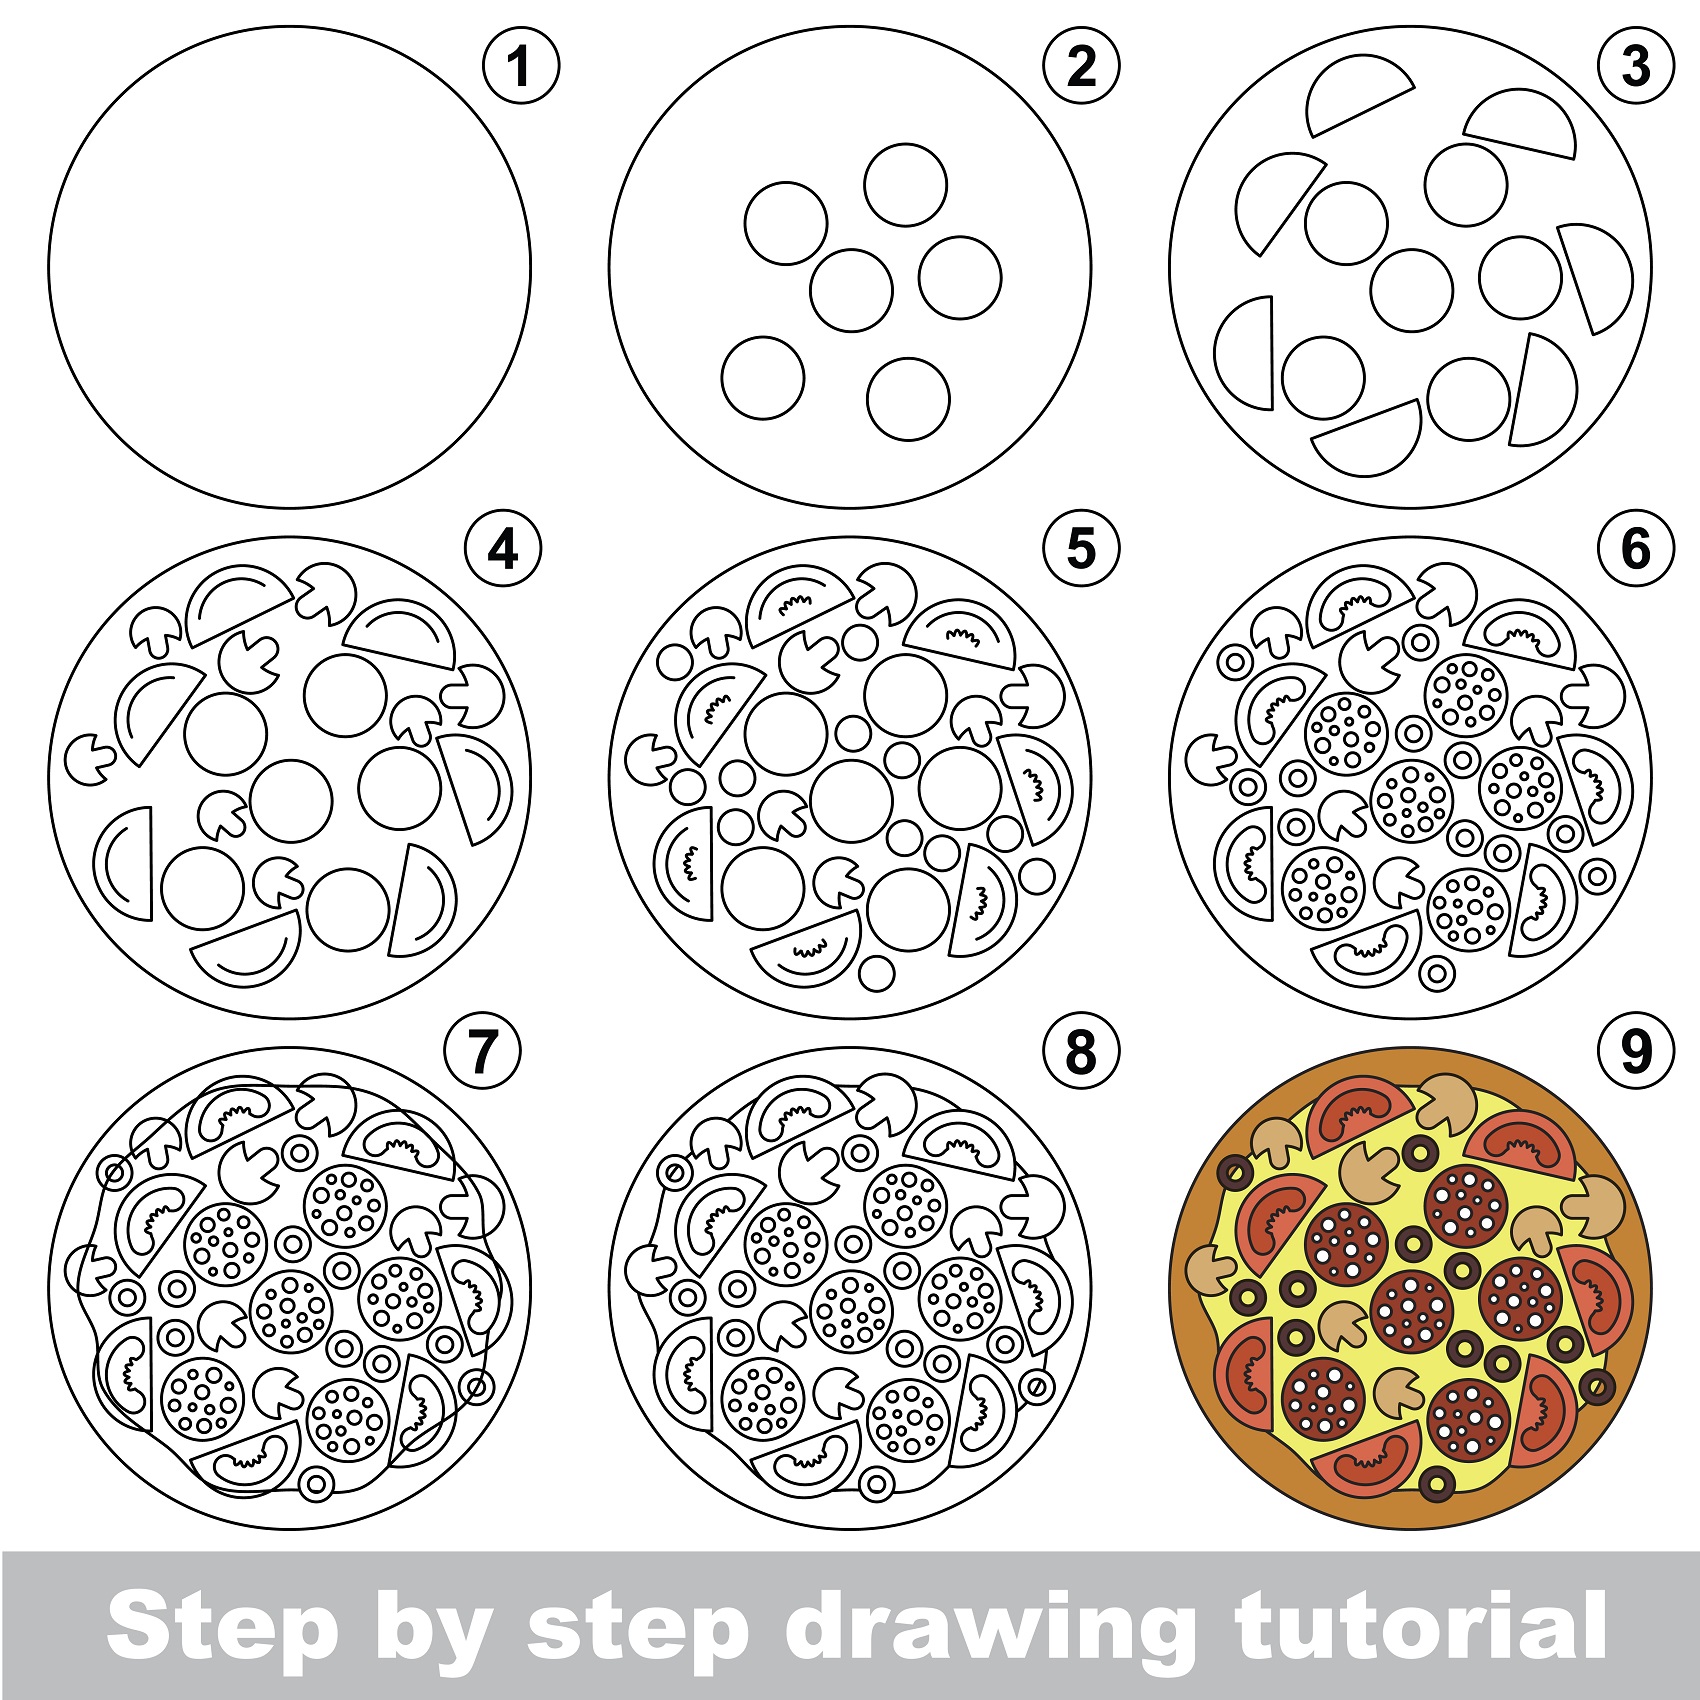 how to draw a pizza